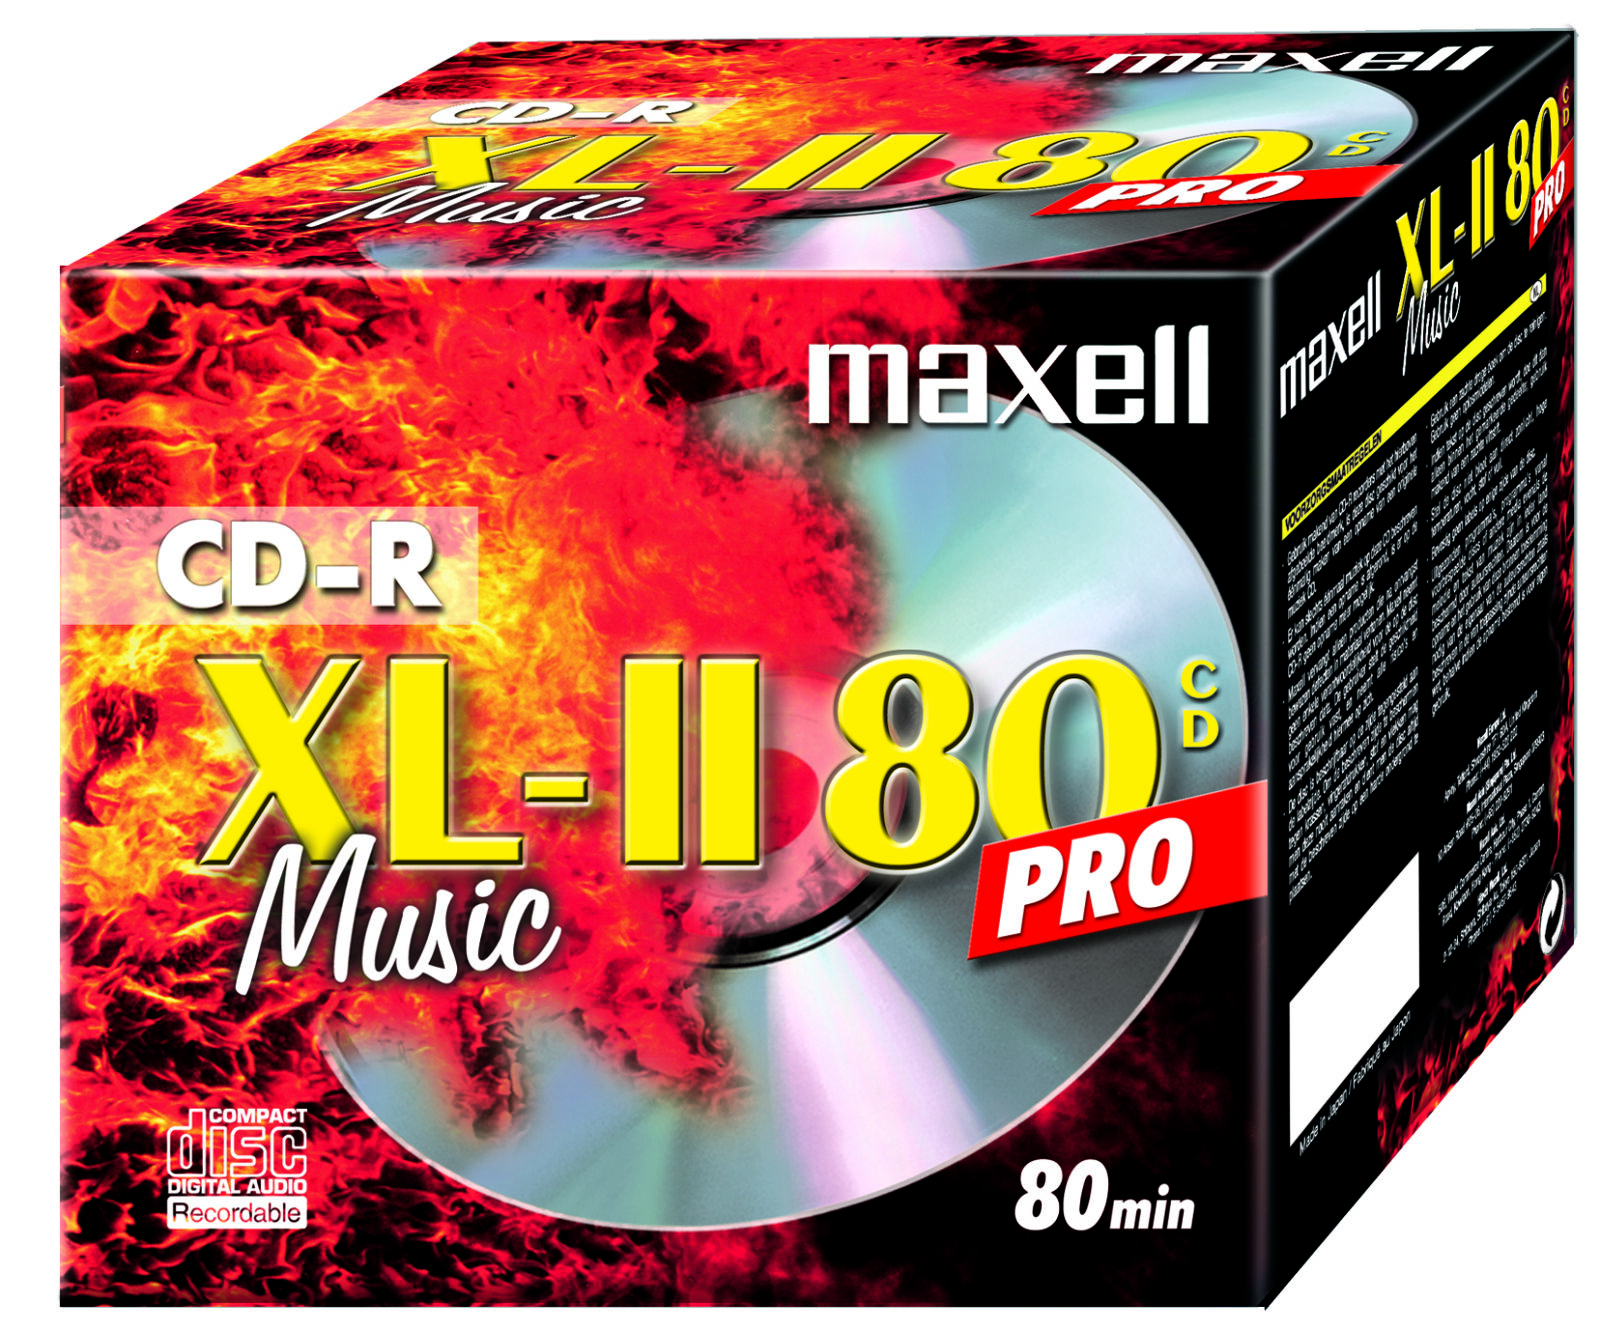 Maxell CD-R Music 10-pack